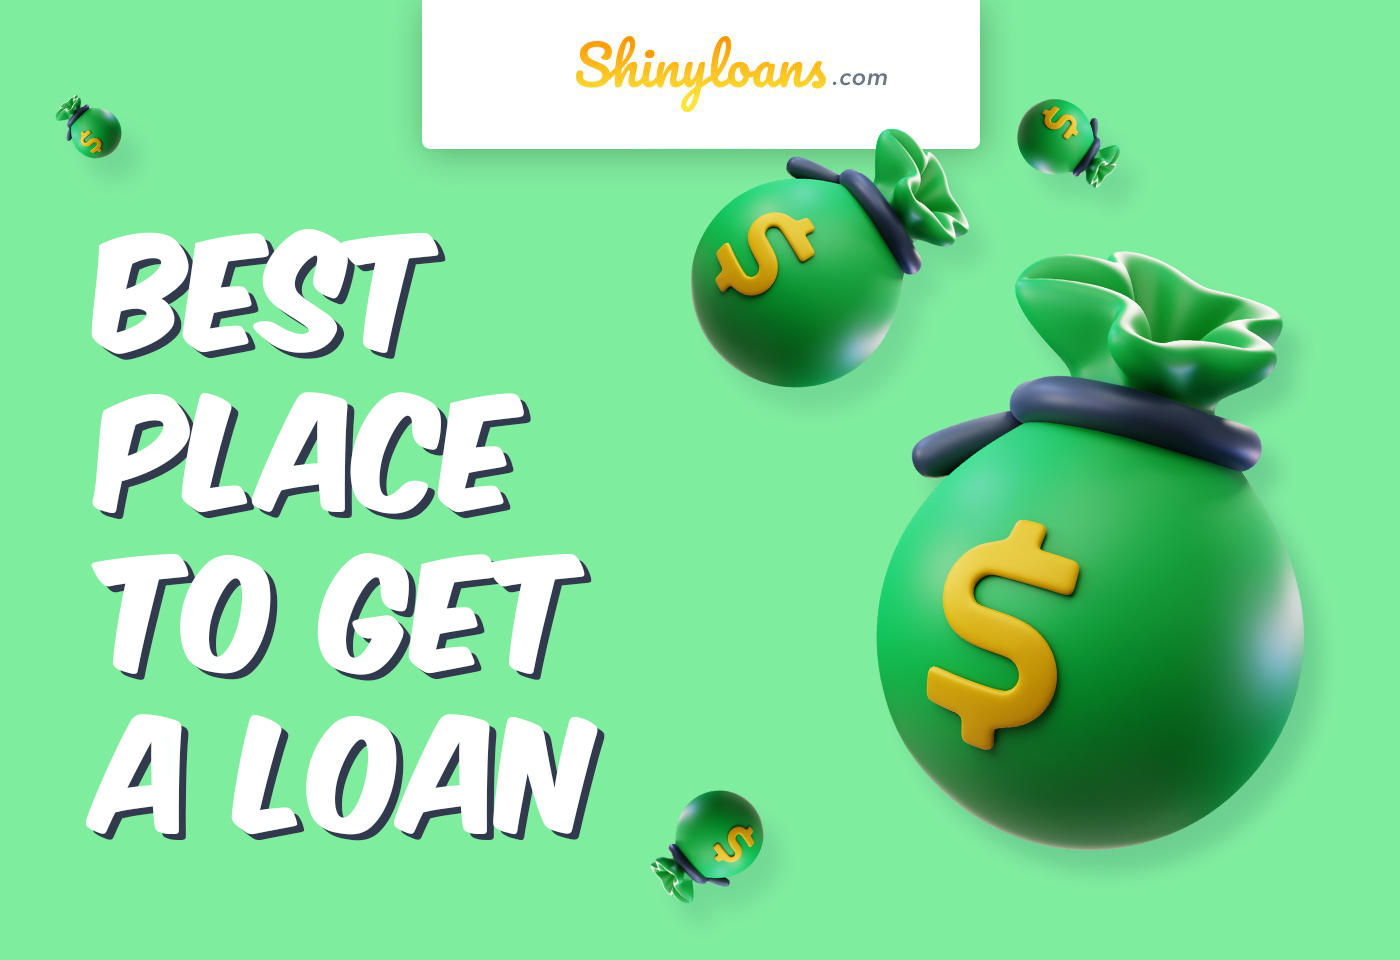 Best Place to Get a Loan